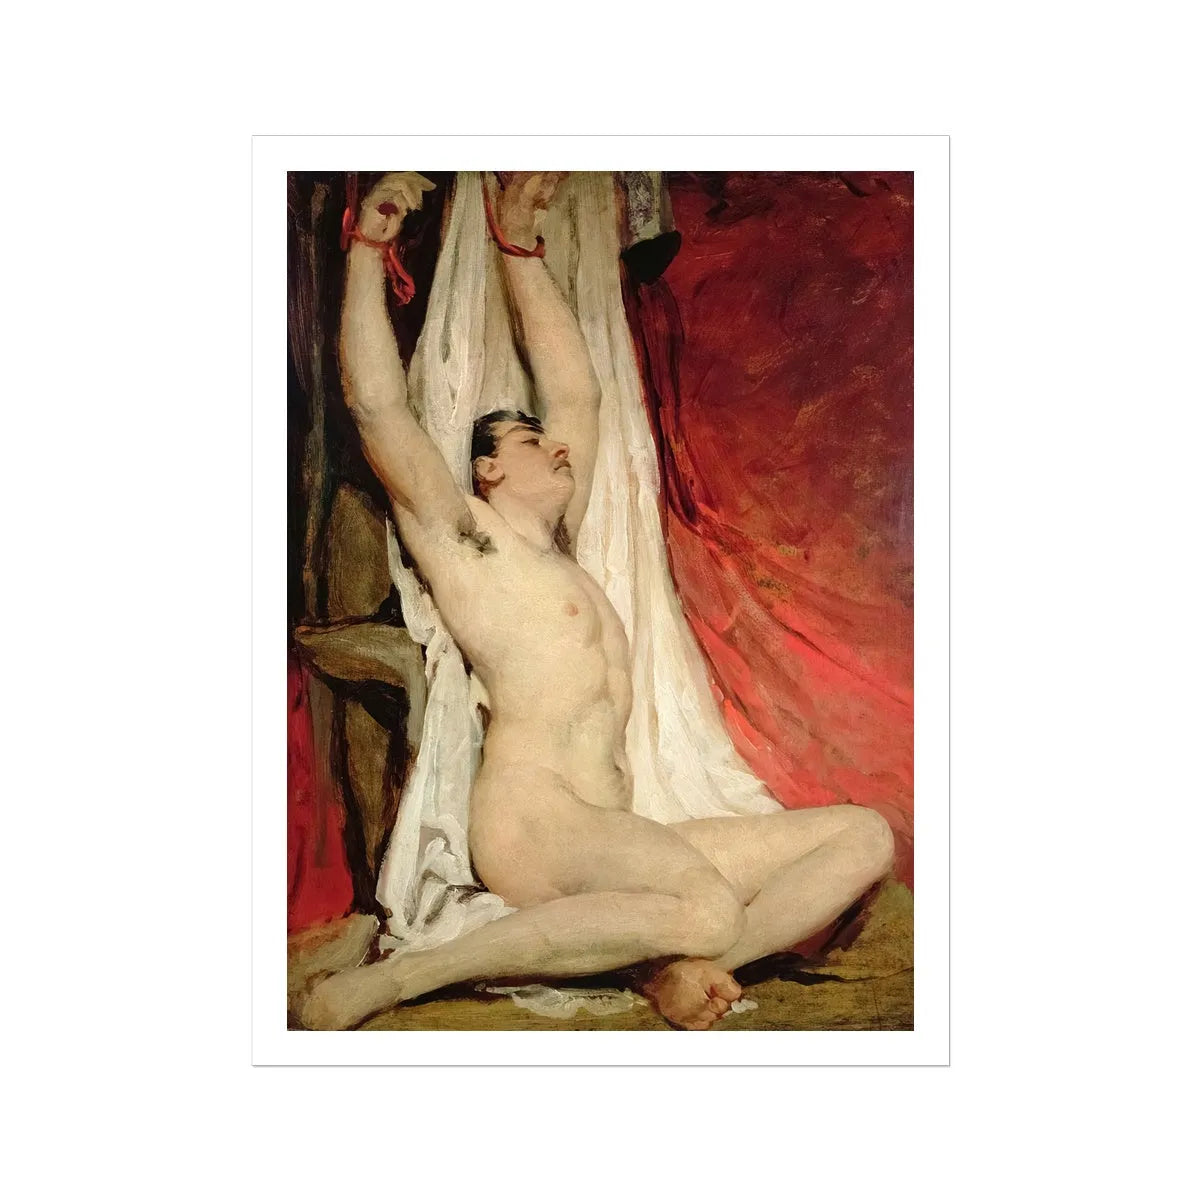 Male Nude With Arms Up-stretched By William Etty Fine Art Print - Posters Prints & Visual Artwork - Aesthetic Art